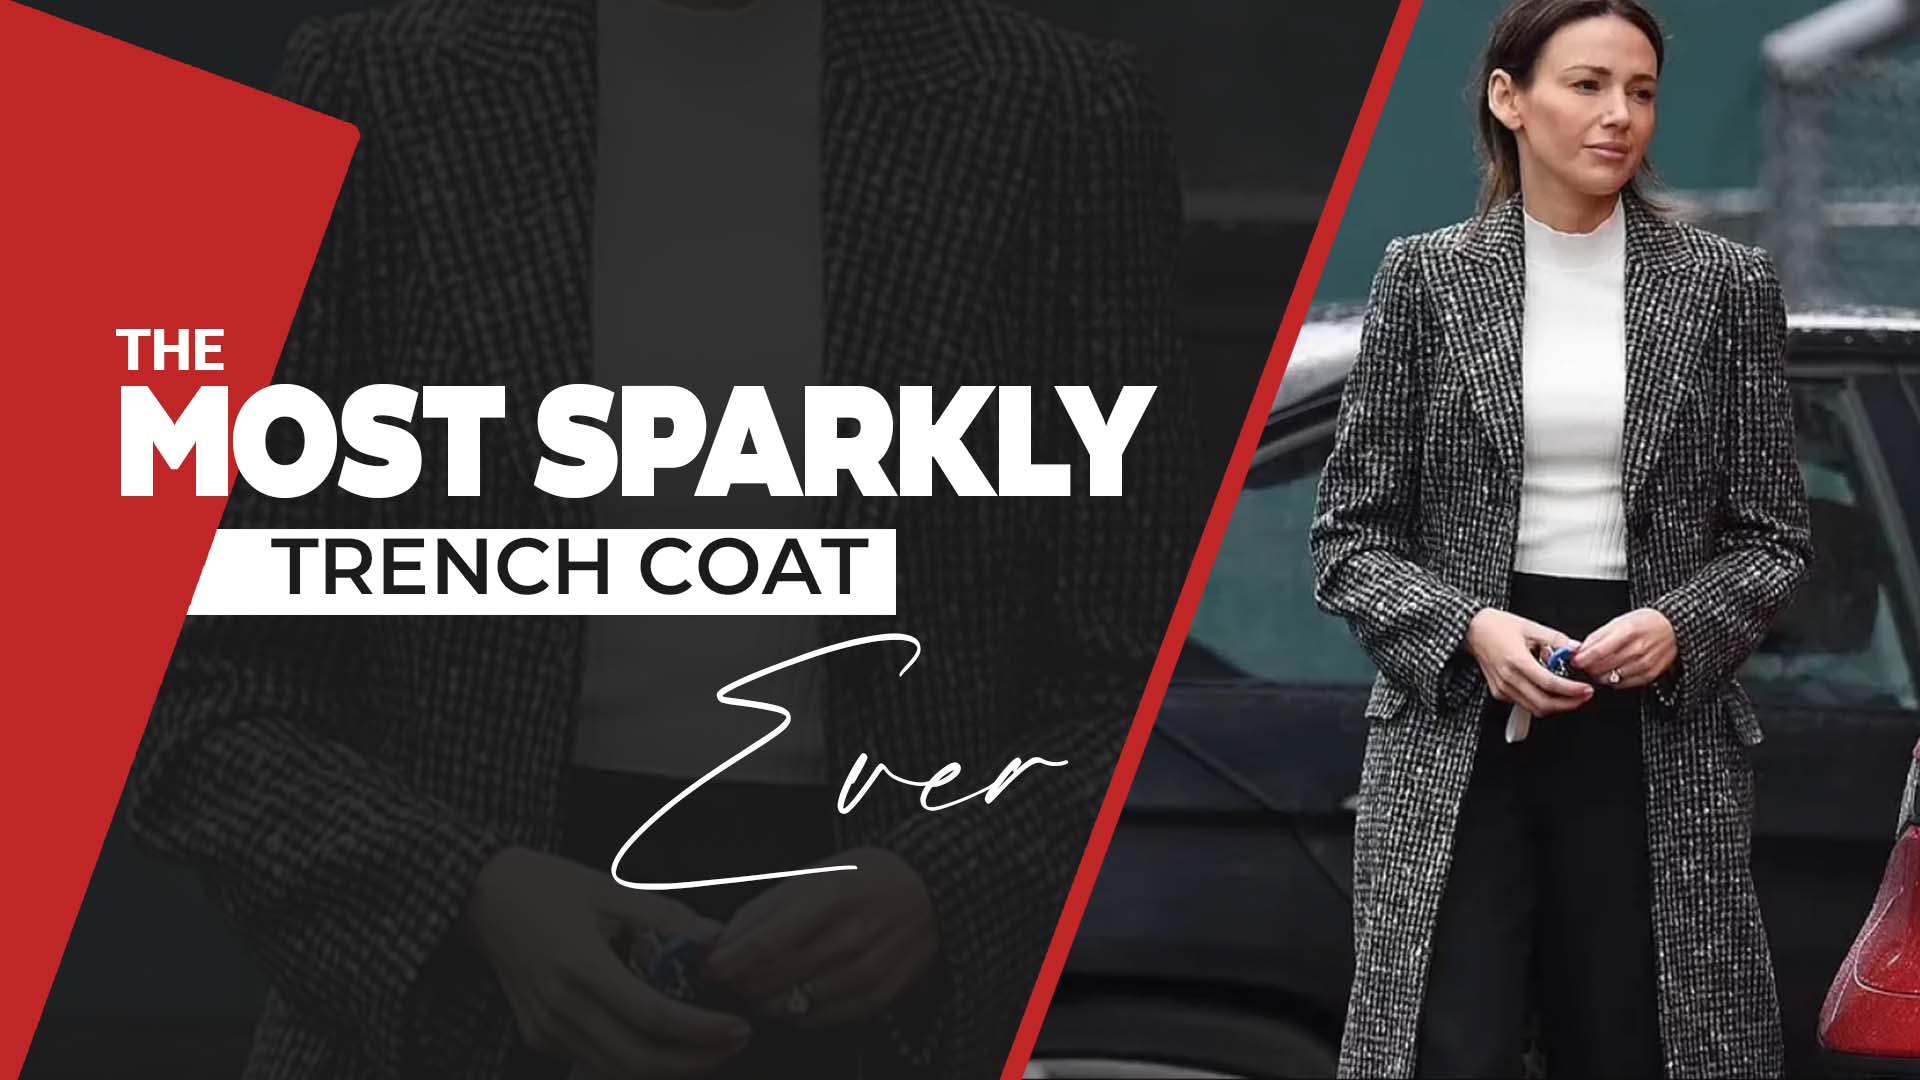 The Most Sparkly Trench Coat Ever